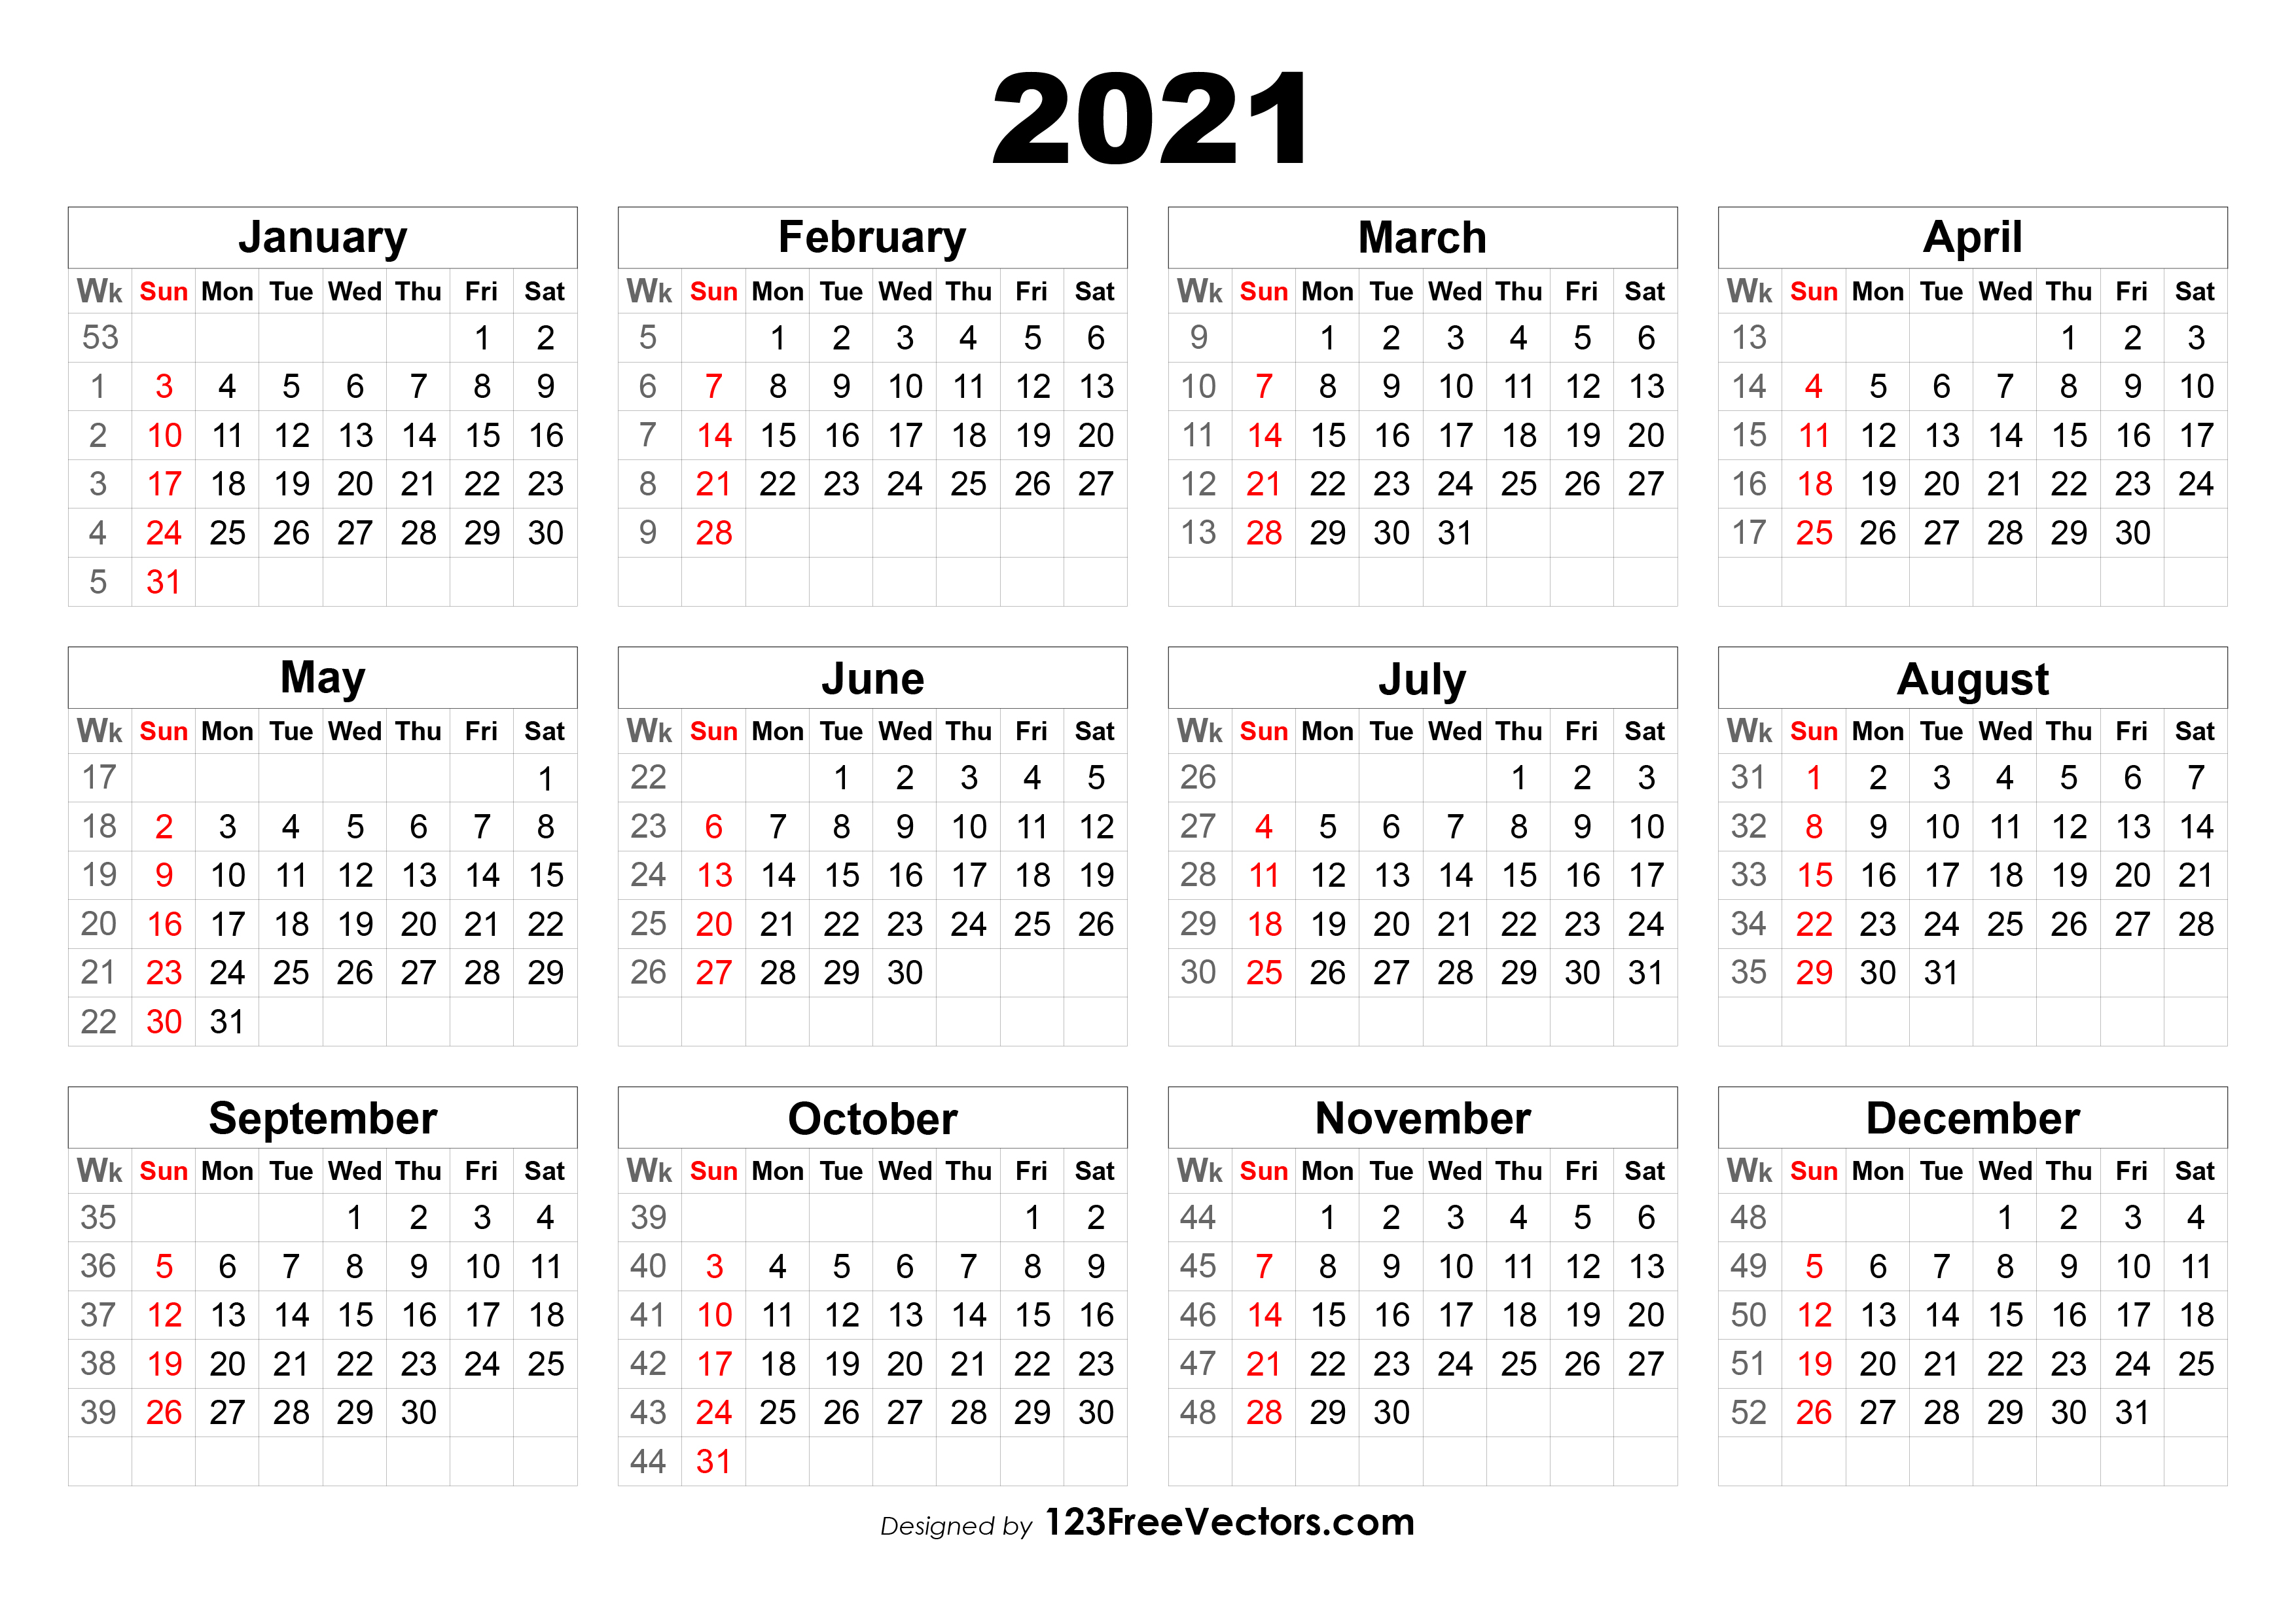 123Freevectors 2021 Calendar Well you're in luck, because here they